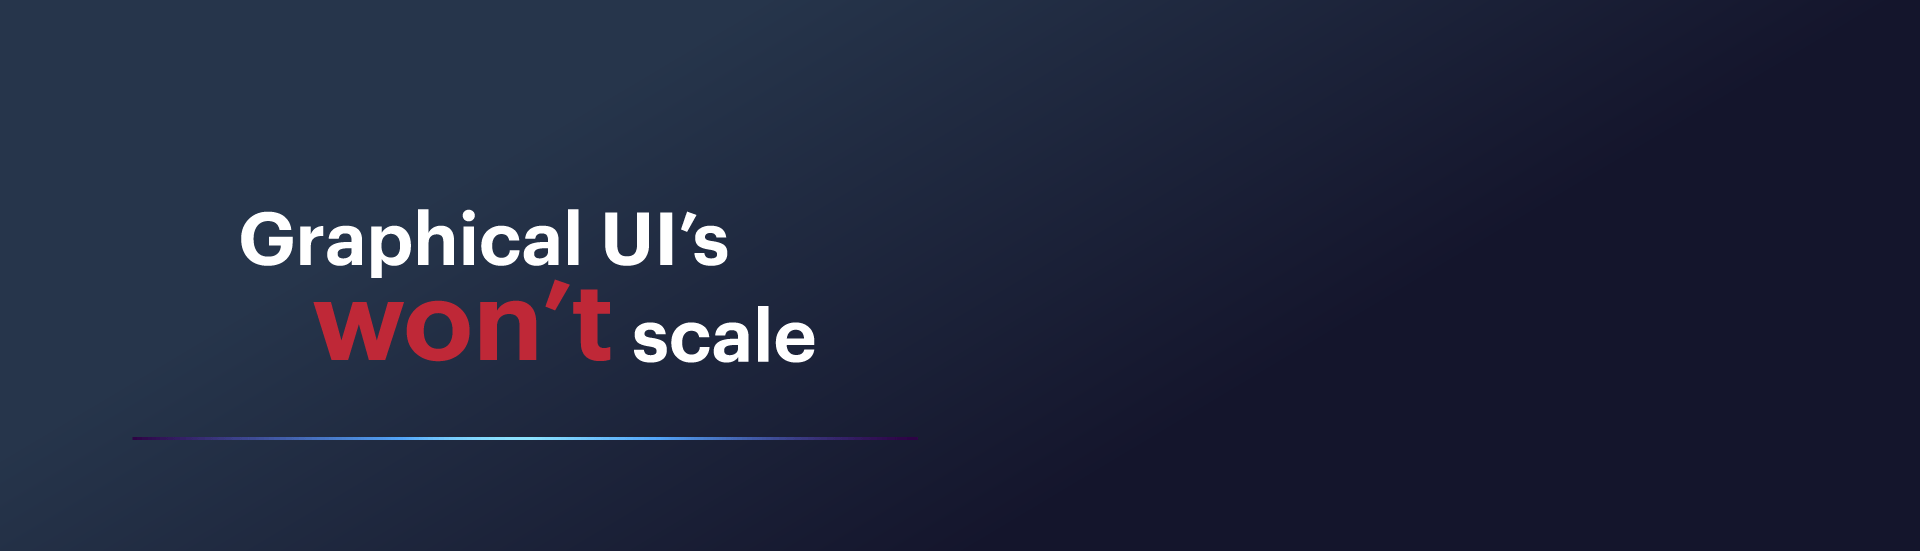 Graphic UI’s won’t scale